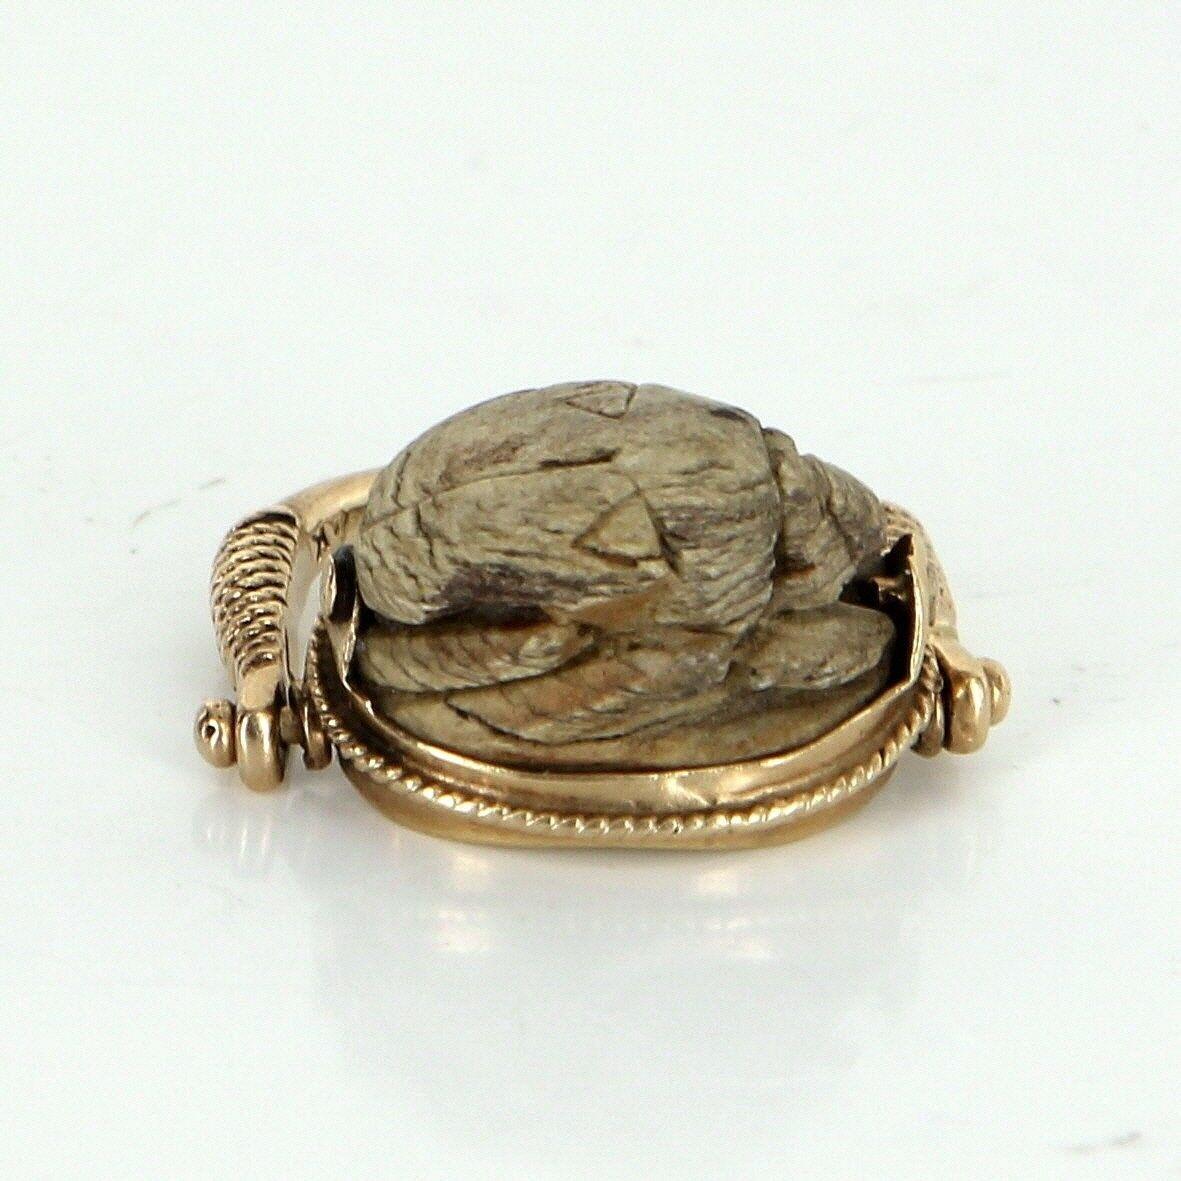 Ornate Egyptian scarab beetle ring (circa 1960s), crafted in 14 karat yellow gold. 

Centrally mounted brown stone is hand carved in the form of a scarab beetle. The side mounts are hinged to allow the ring to move forwards or backwards (or 'flip').